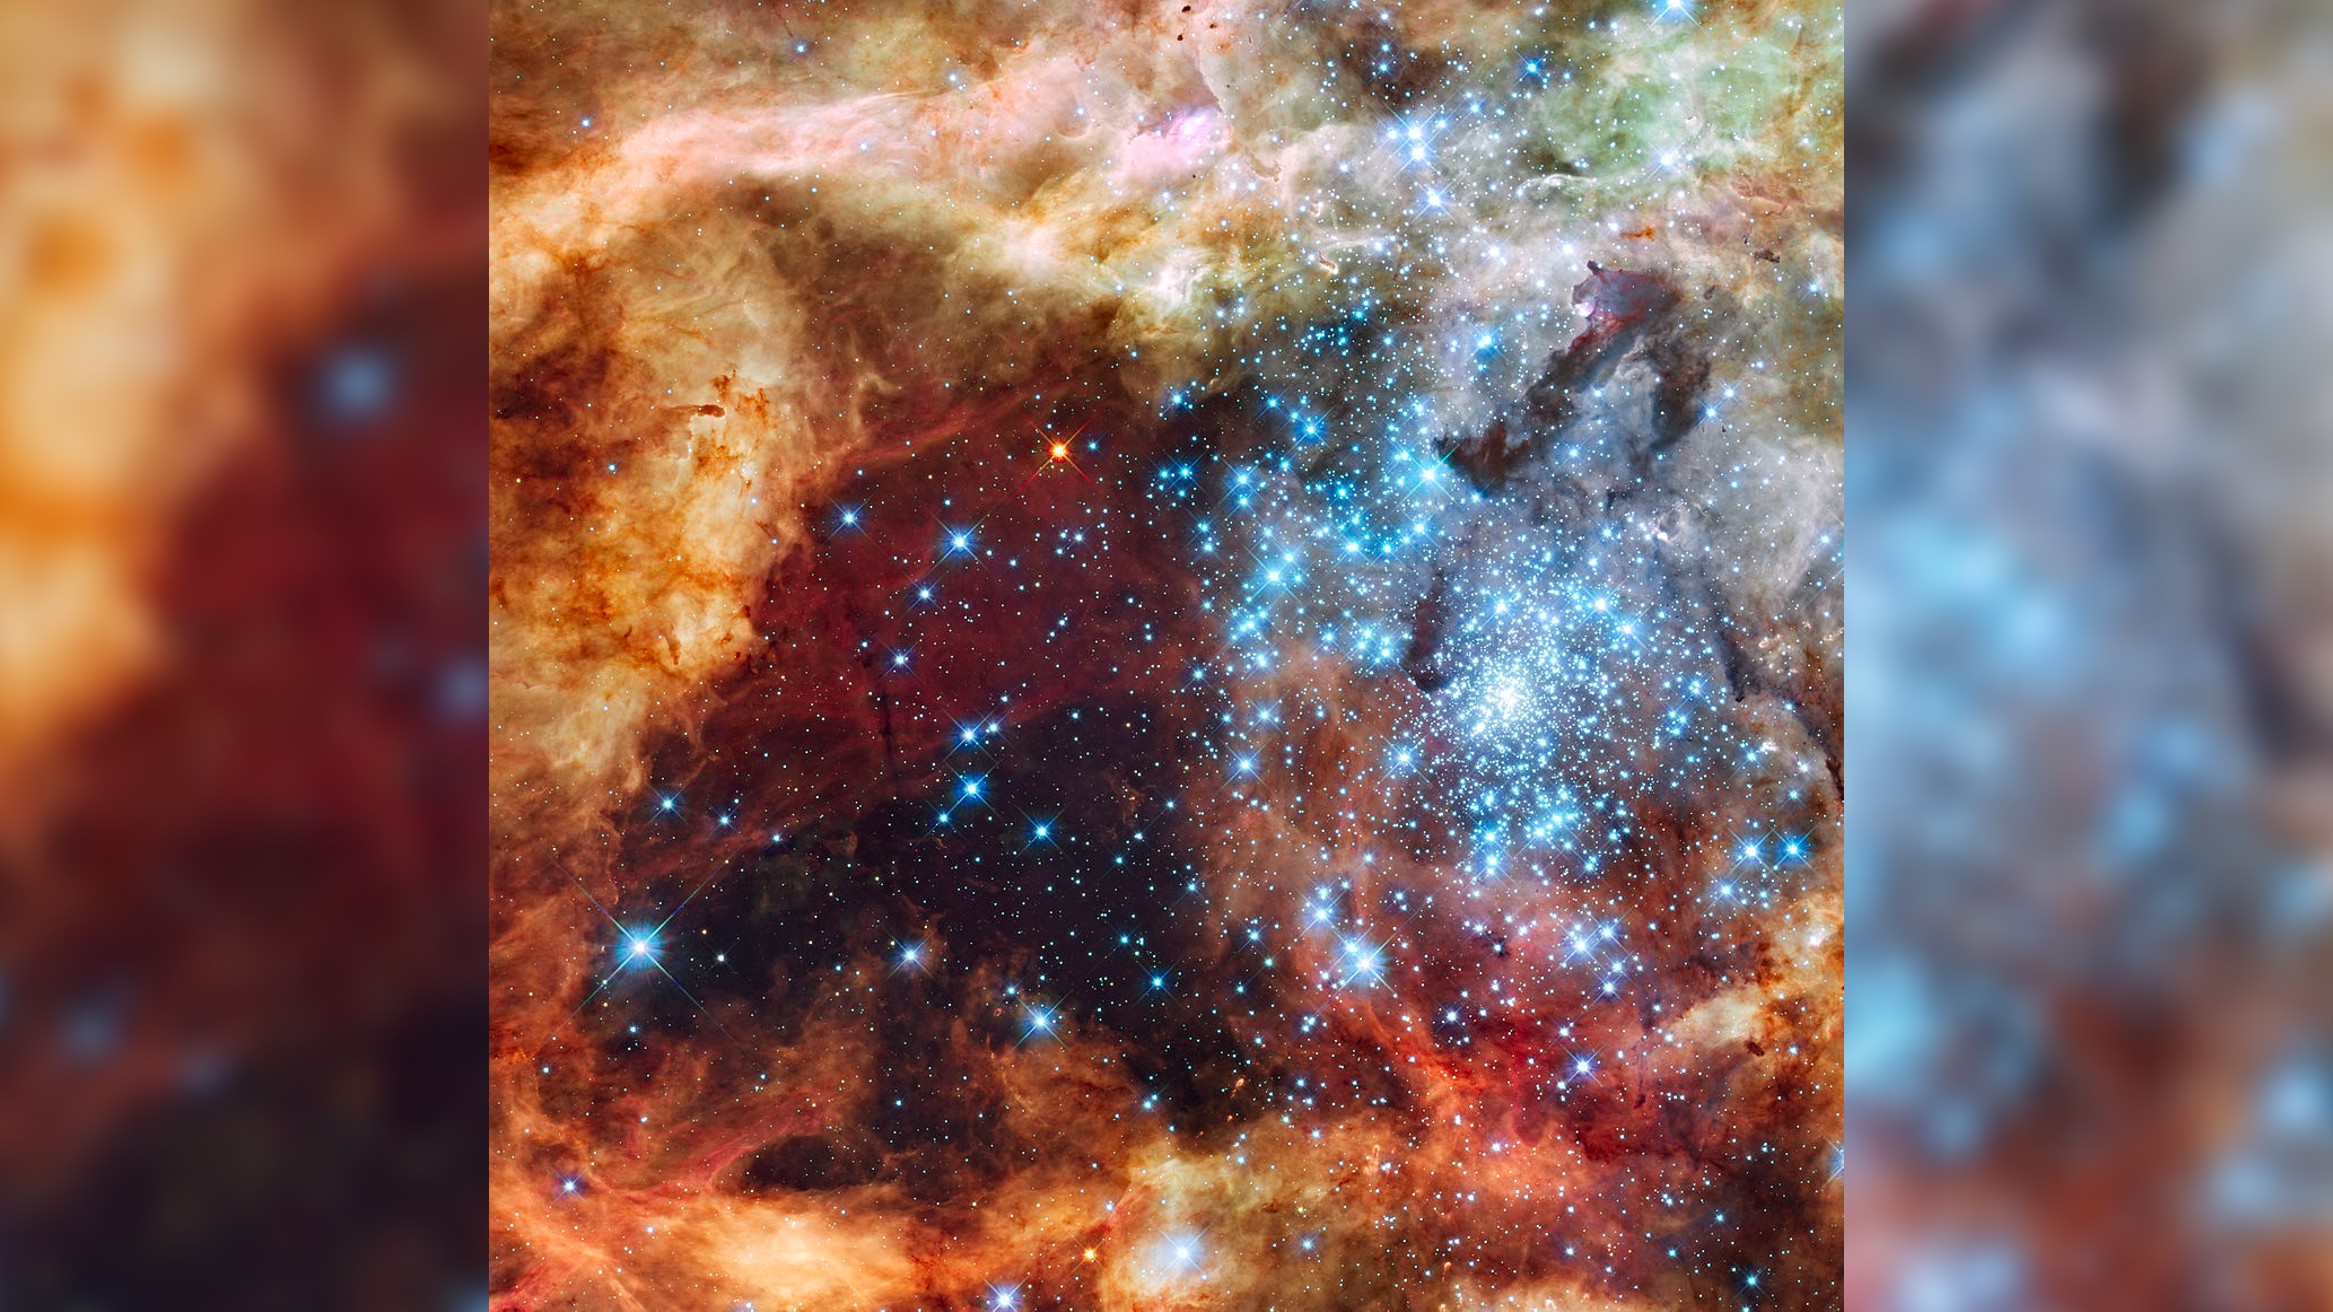 A star nursery is filled with clouds of orange and yellow dust.  In the center of the image are a lot of bright bluish-white stars.